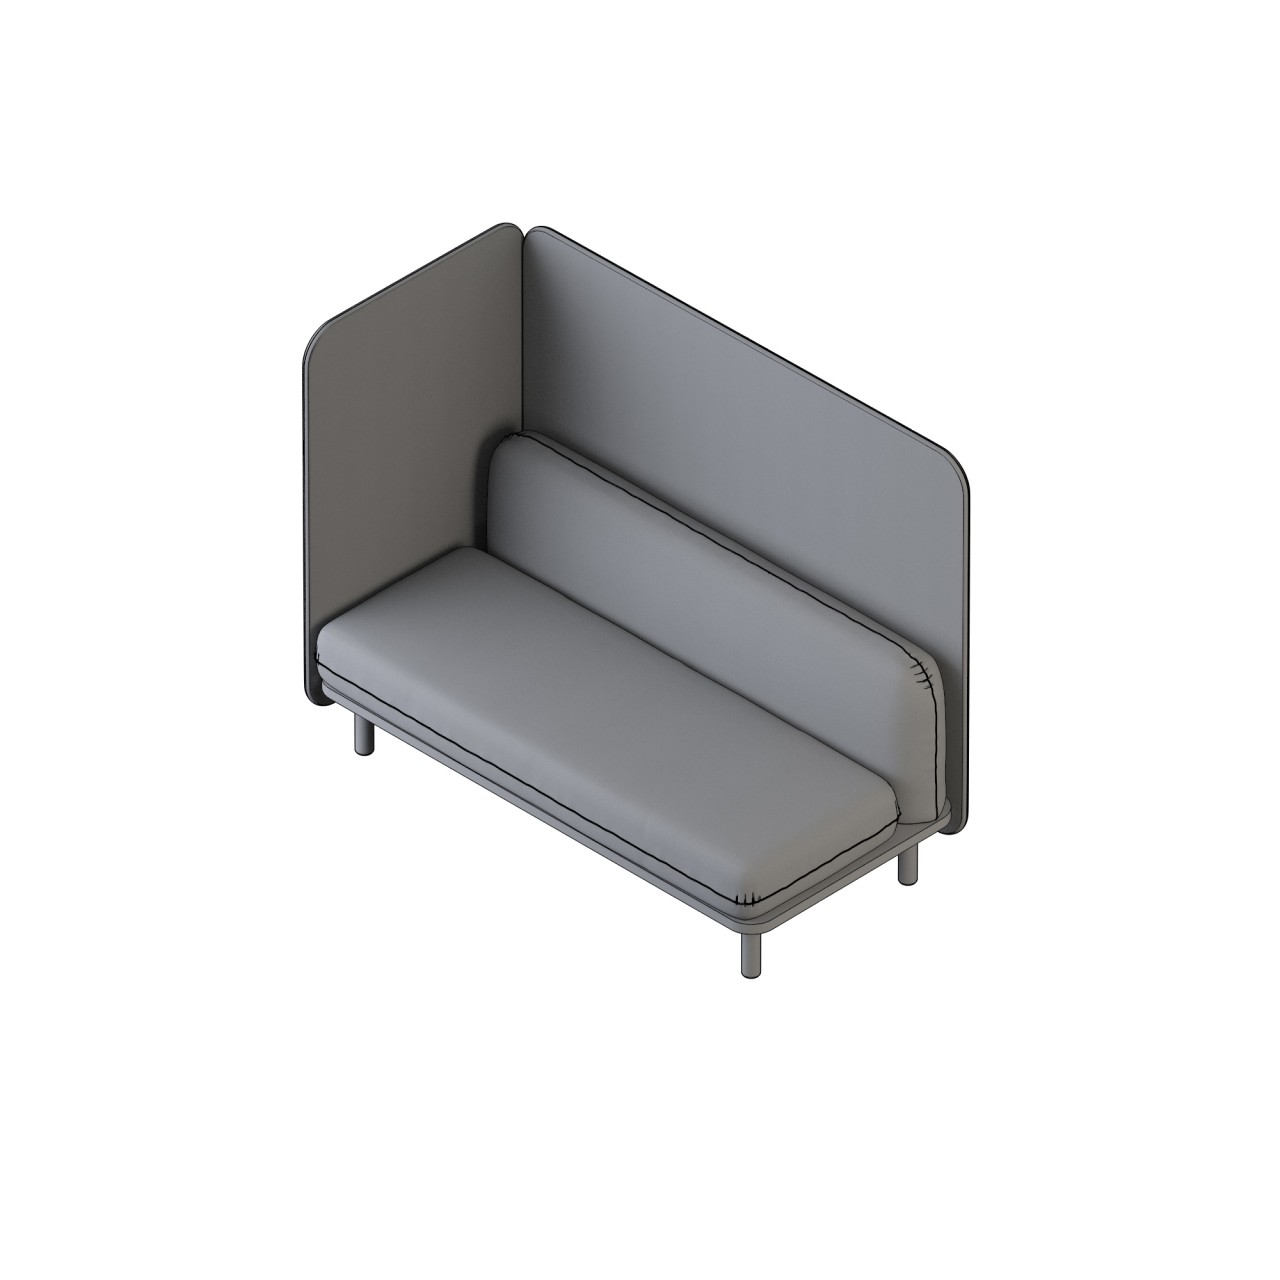 Soft - 24004-BR
two seat privacy
back and right
COM 6.5
back 2.25,
base 2, seat 4.25,
panels 12.75